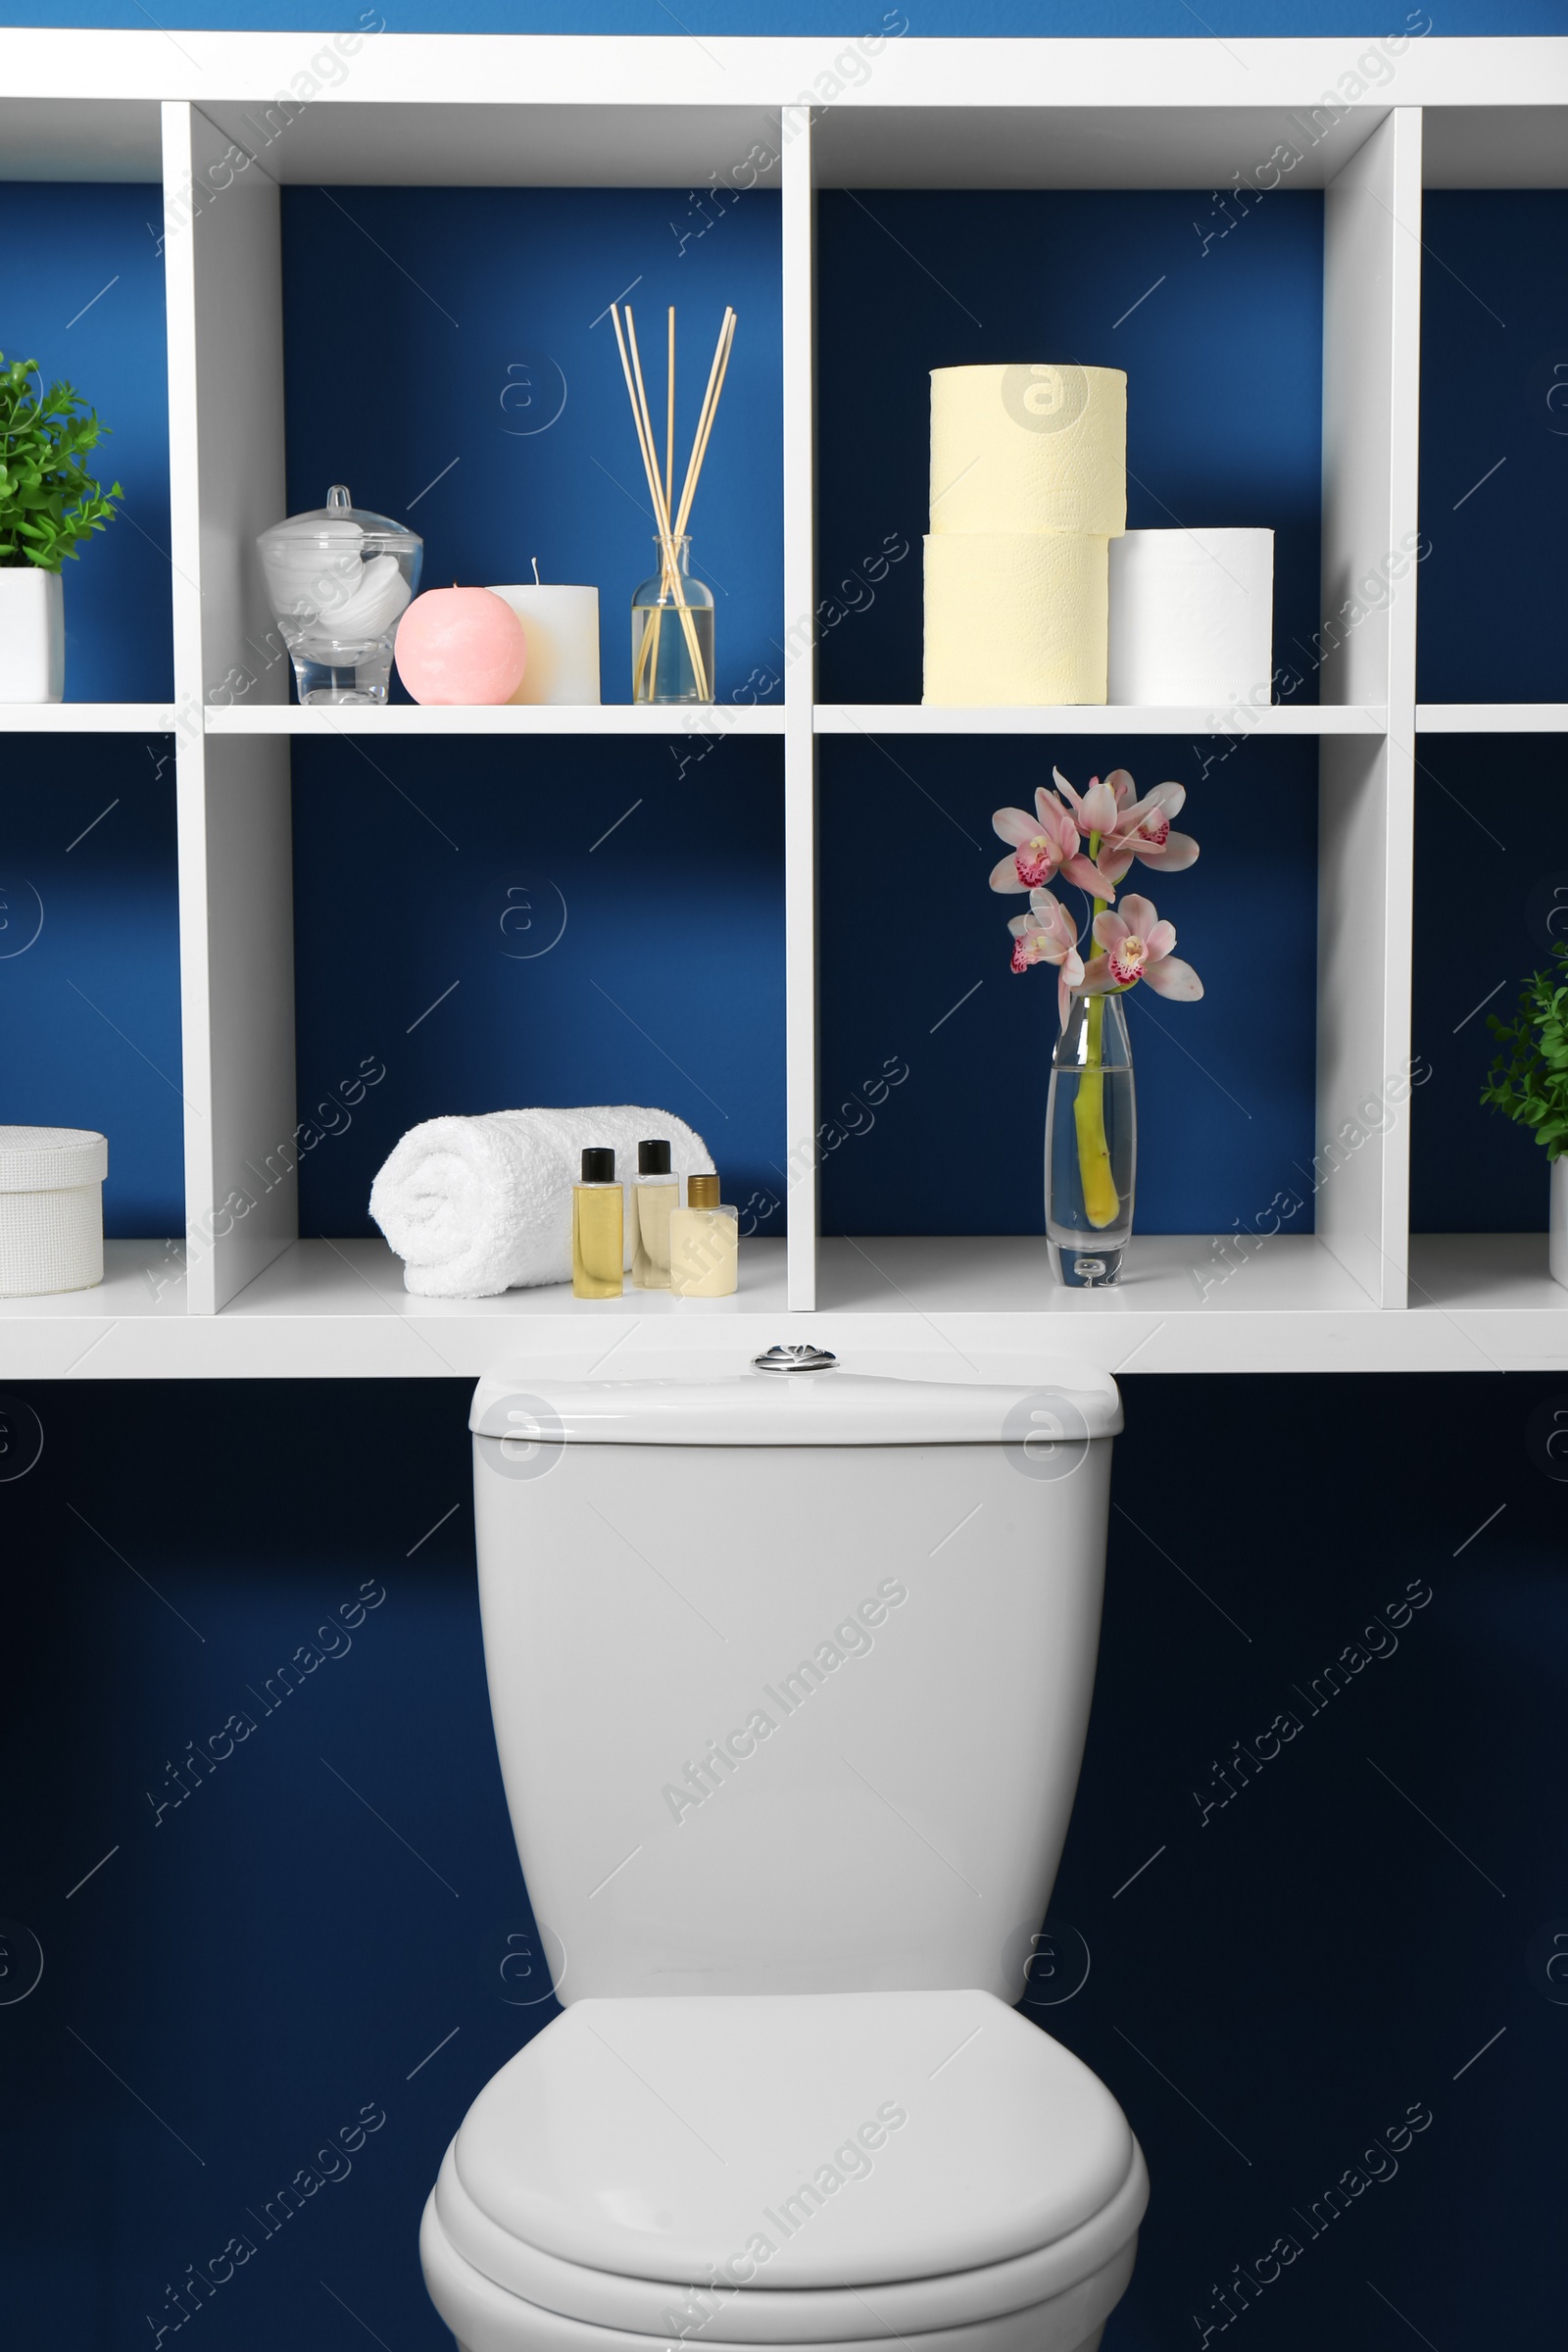 Photo of Shelves with different stuff on blue wall above toilet bowl in restroom interior